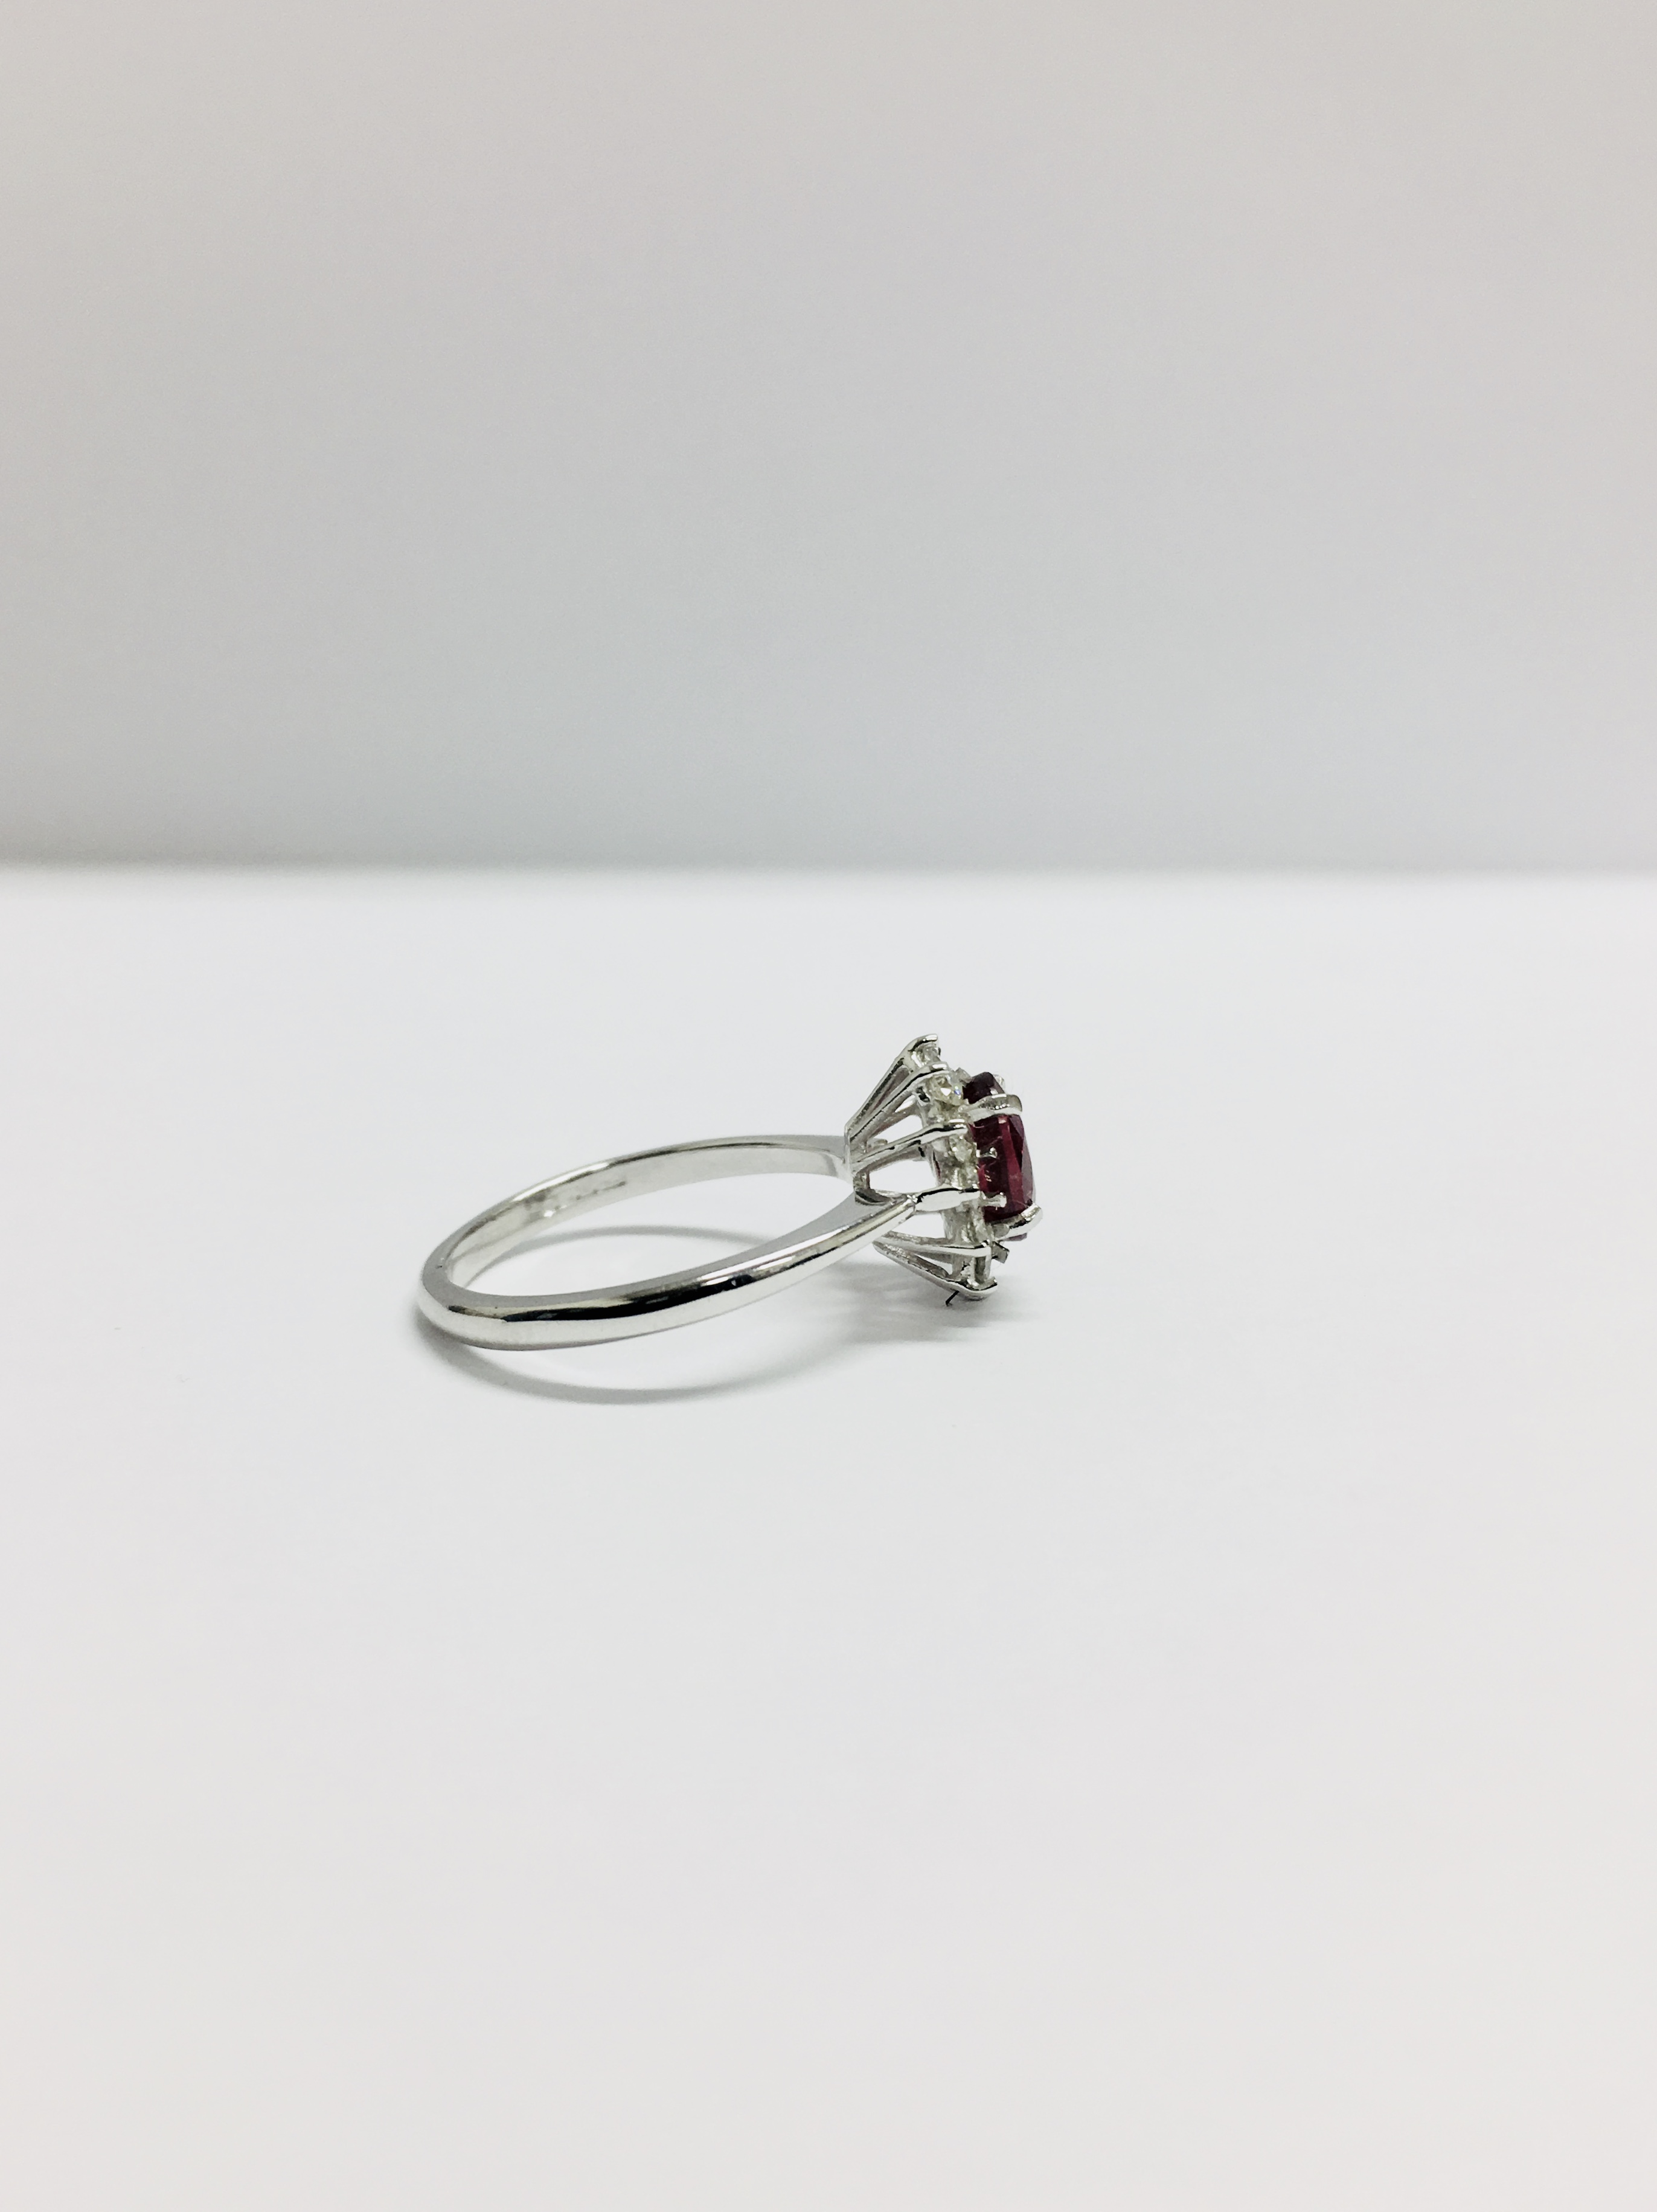 0.80Ct Ruby And Diamond Cluster Ring Set With A Oval Cut(Glass Filled) Ruby - Image 6 of 9